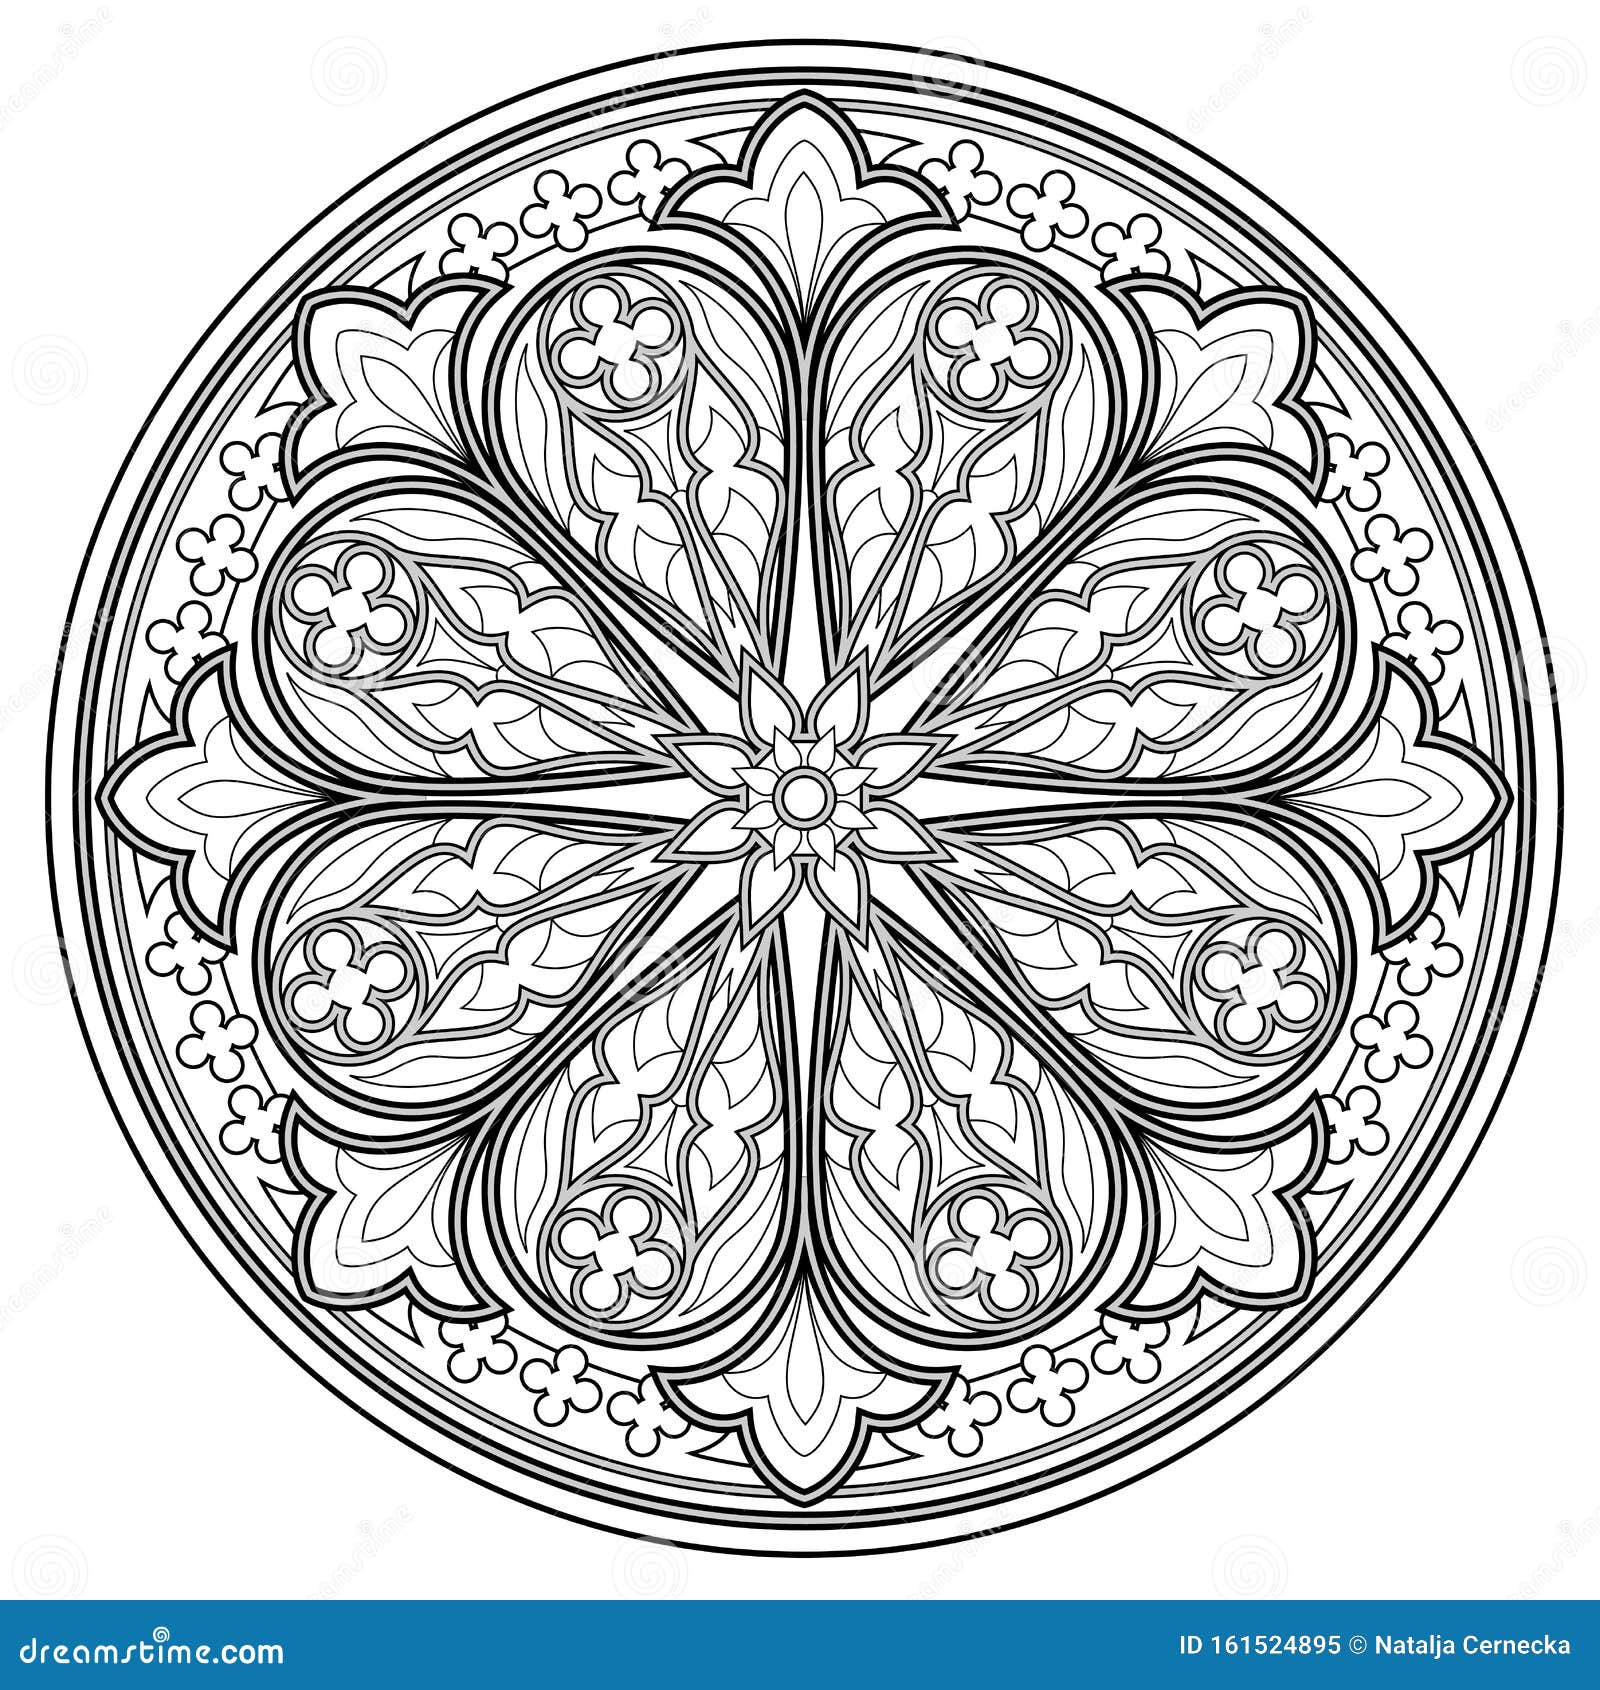 Rose window coloring stock illustrations â rose window coloring stock illustrations vectors clipart